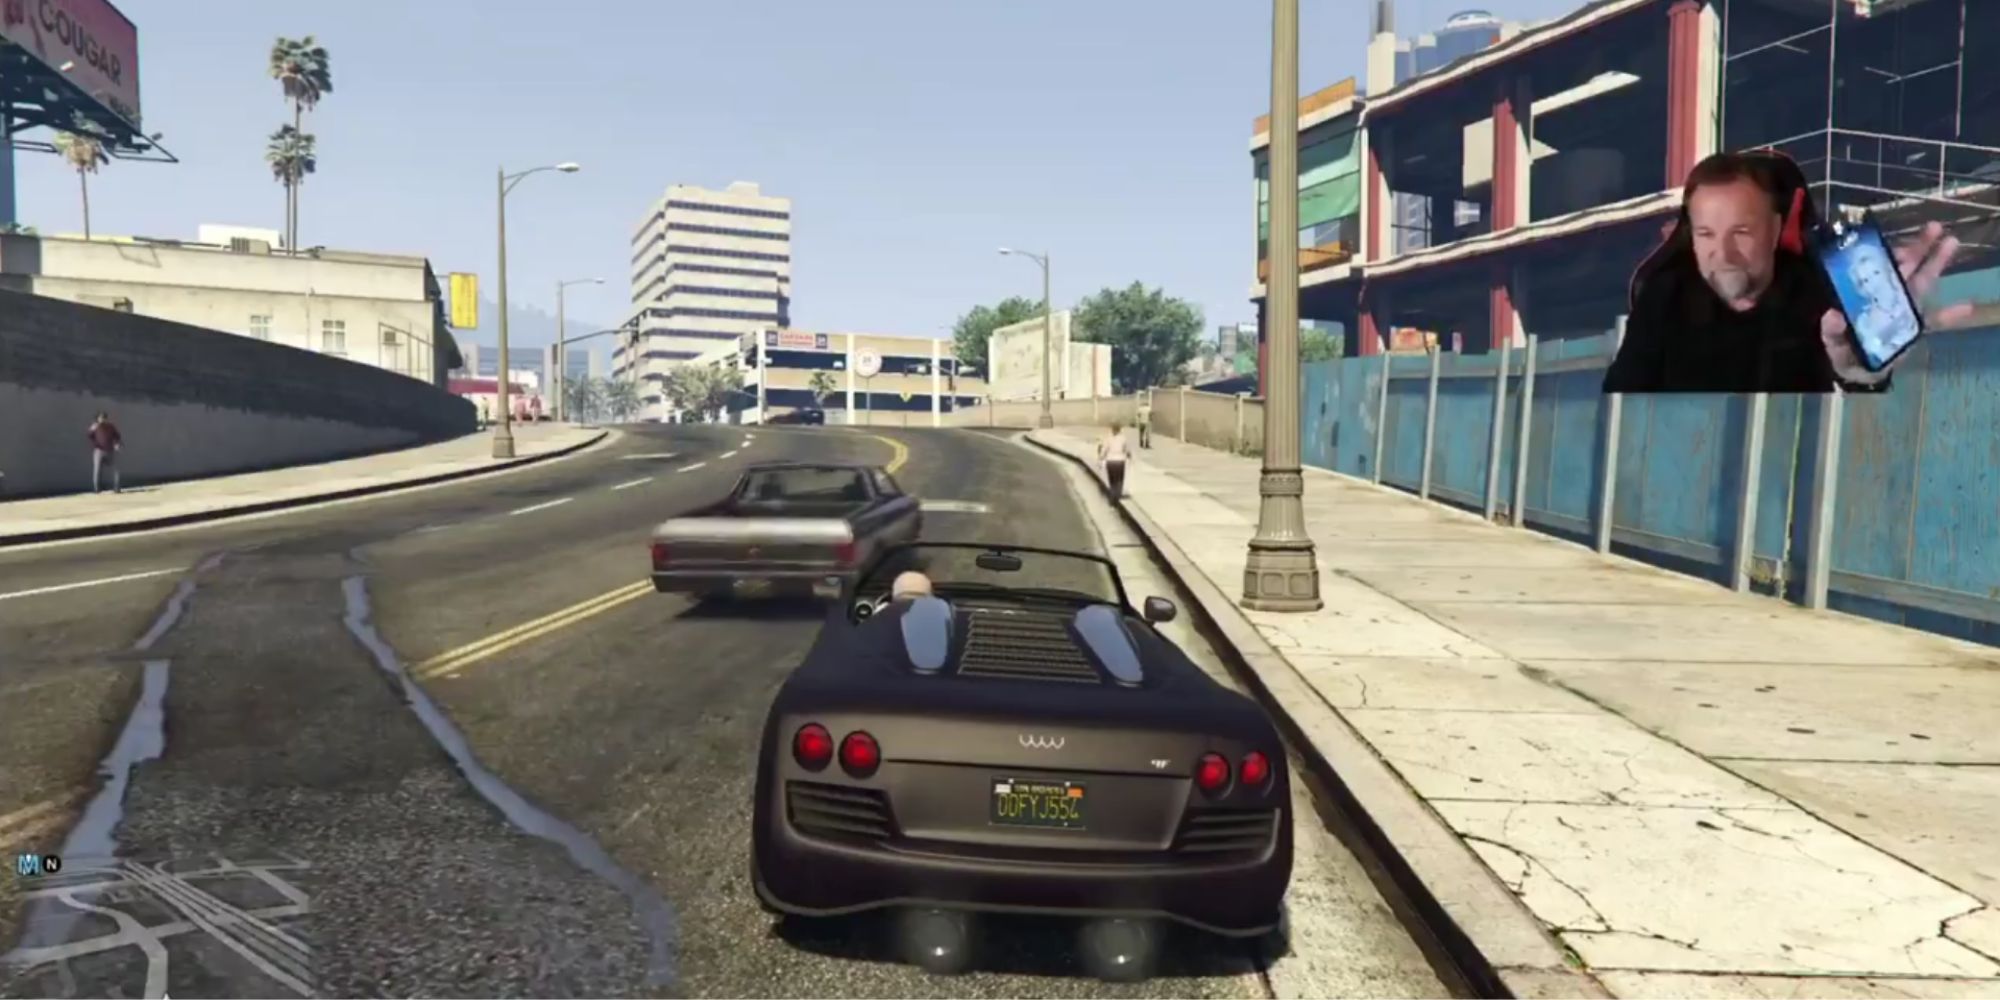 Ned Luke getting swatted during his GTA 5 livestream.